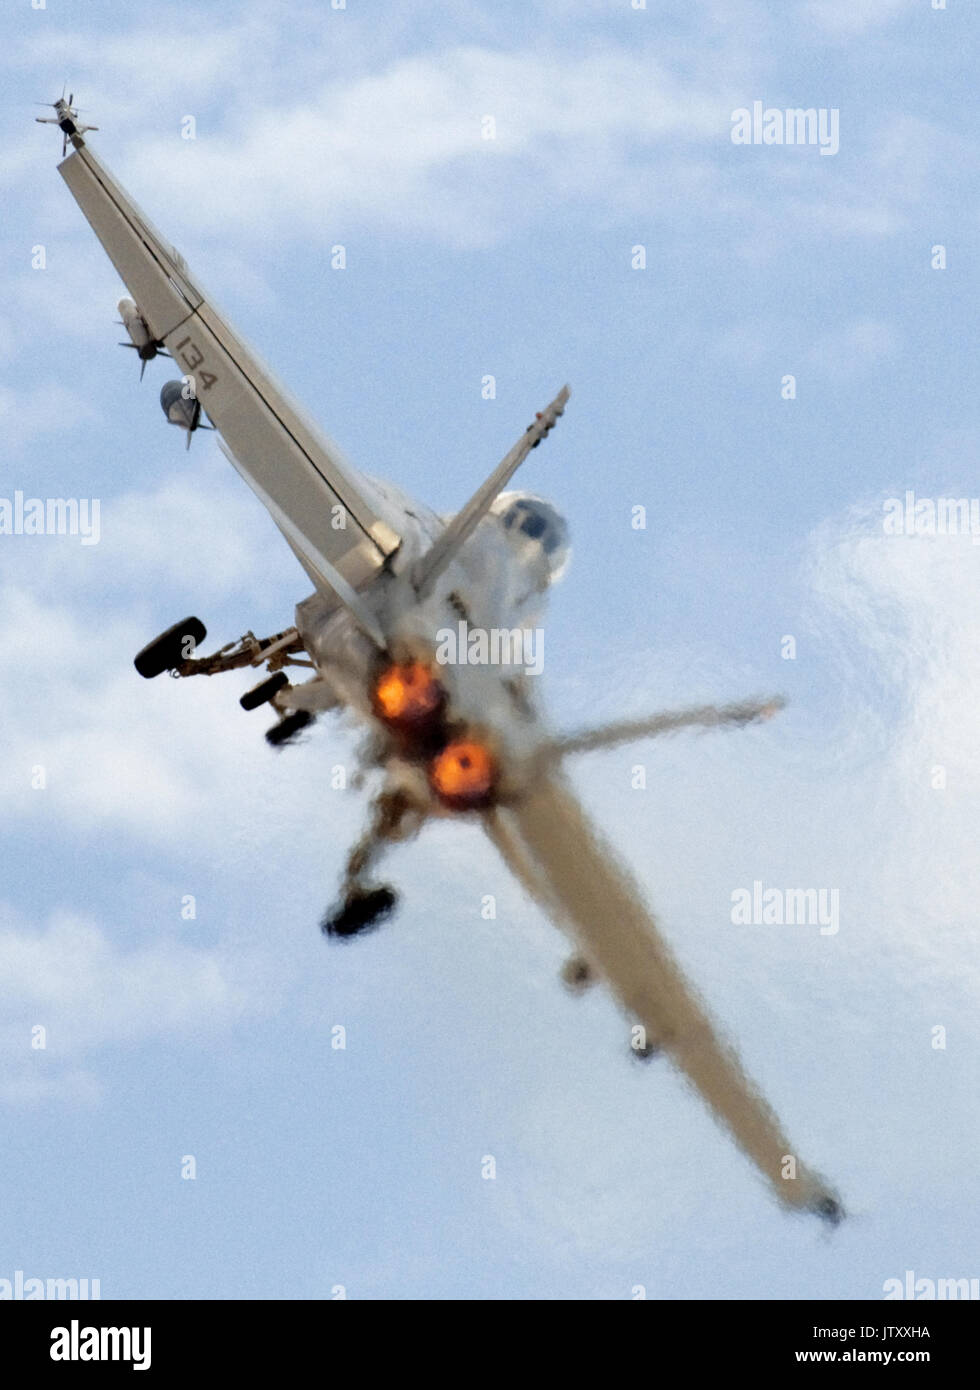 Rear end portrait view of an F/A18 Super Hornet with full afterburners on, at takeoff. Stock Photo